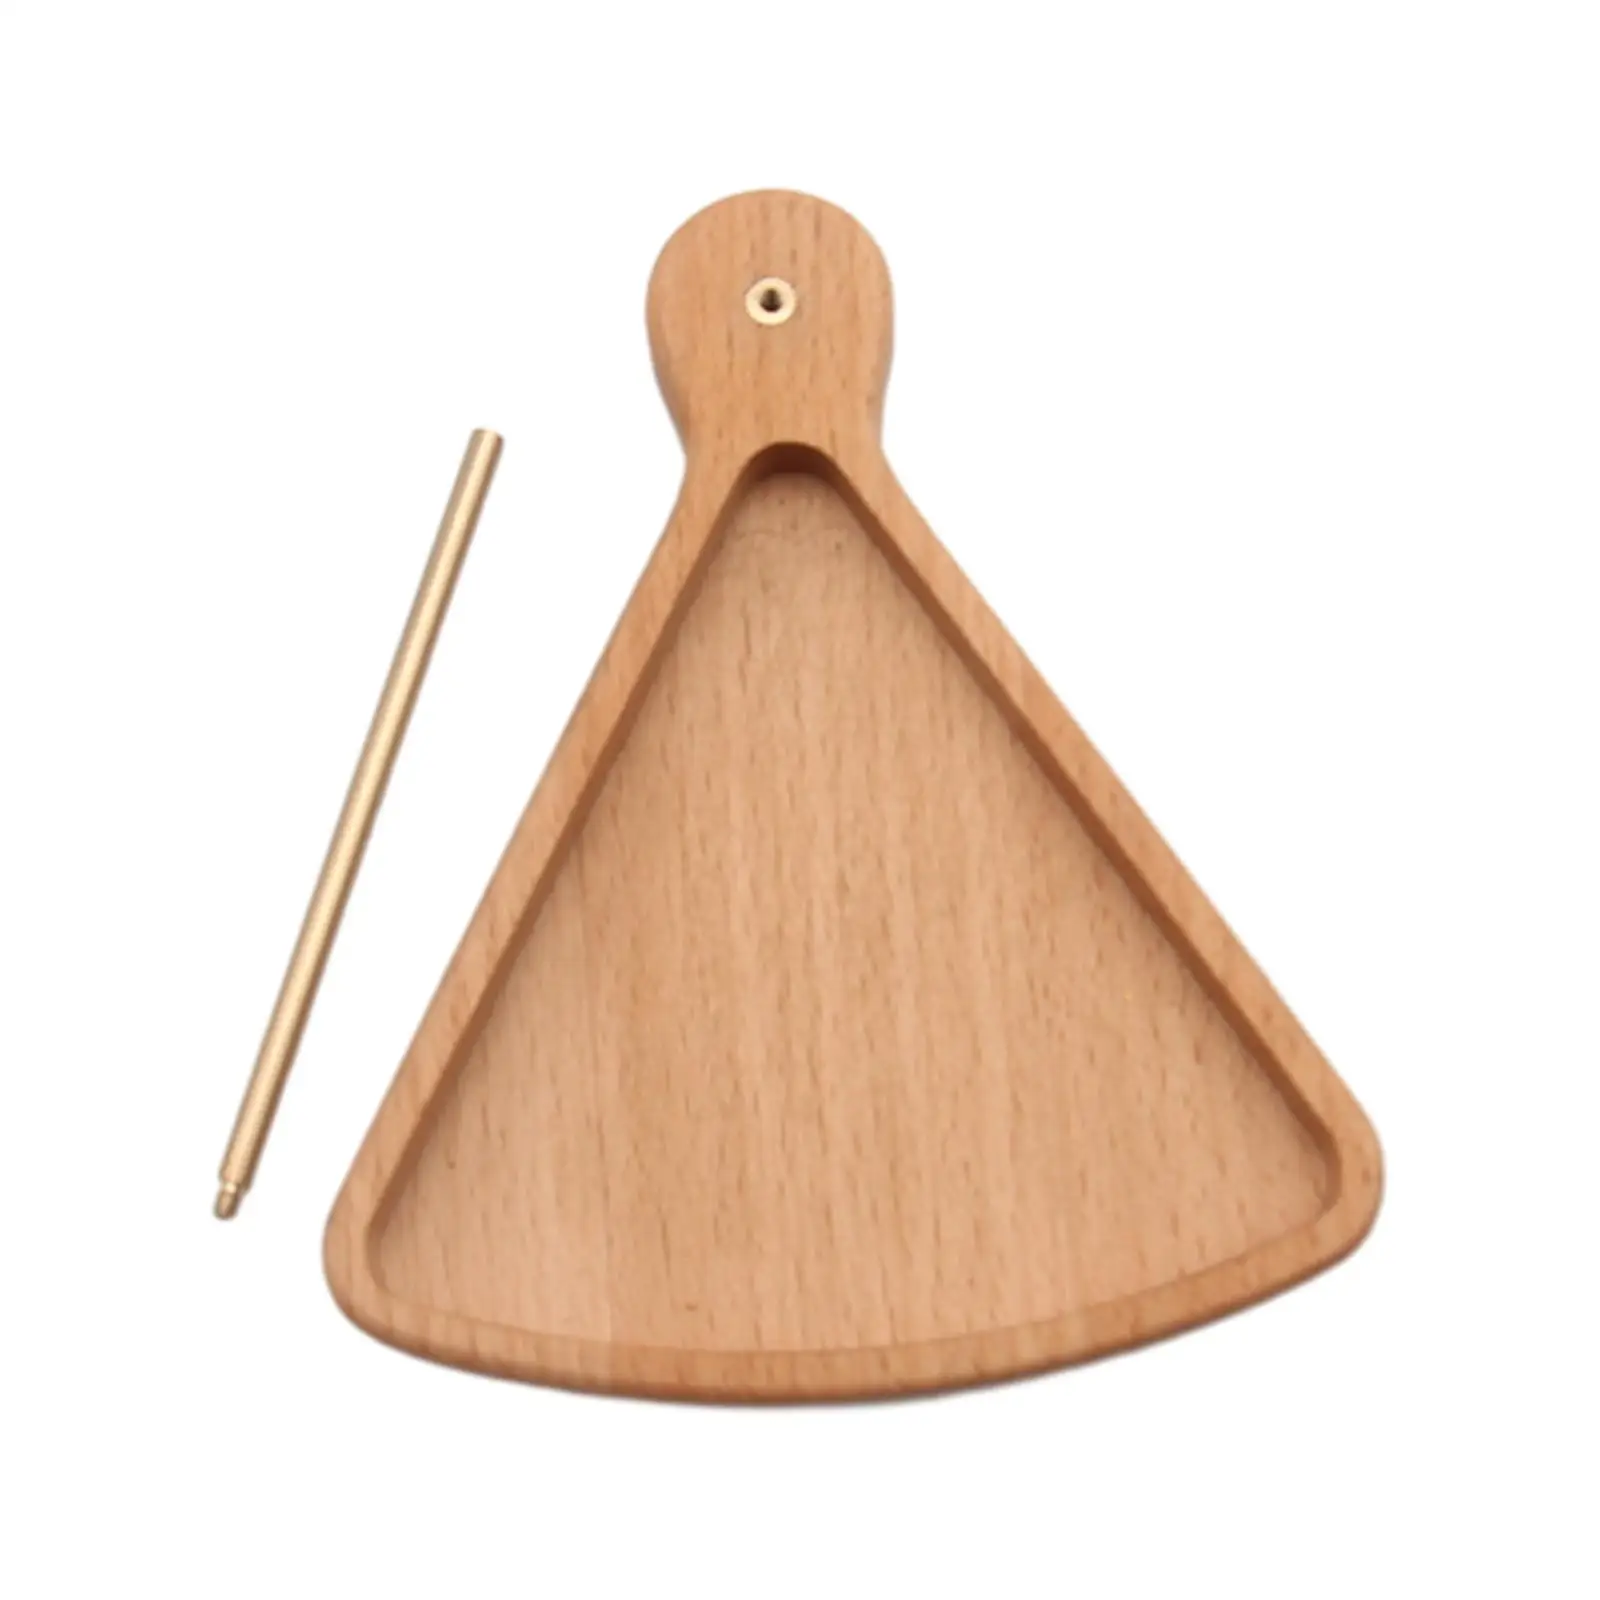 Embroidery Thread Holder Wood Gift for Crafts Lover Accessories Threading Holder for Adults Sewing Crocheting Home String Ball